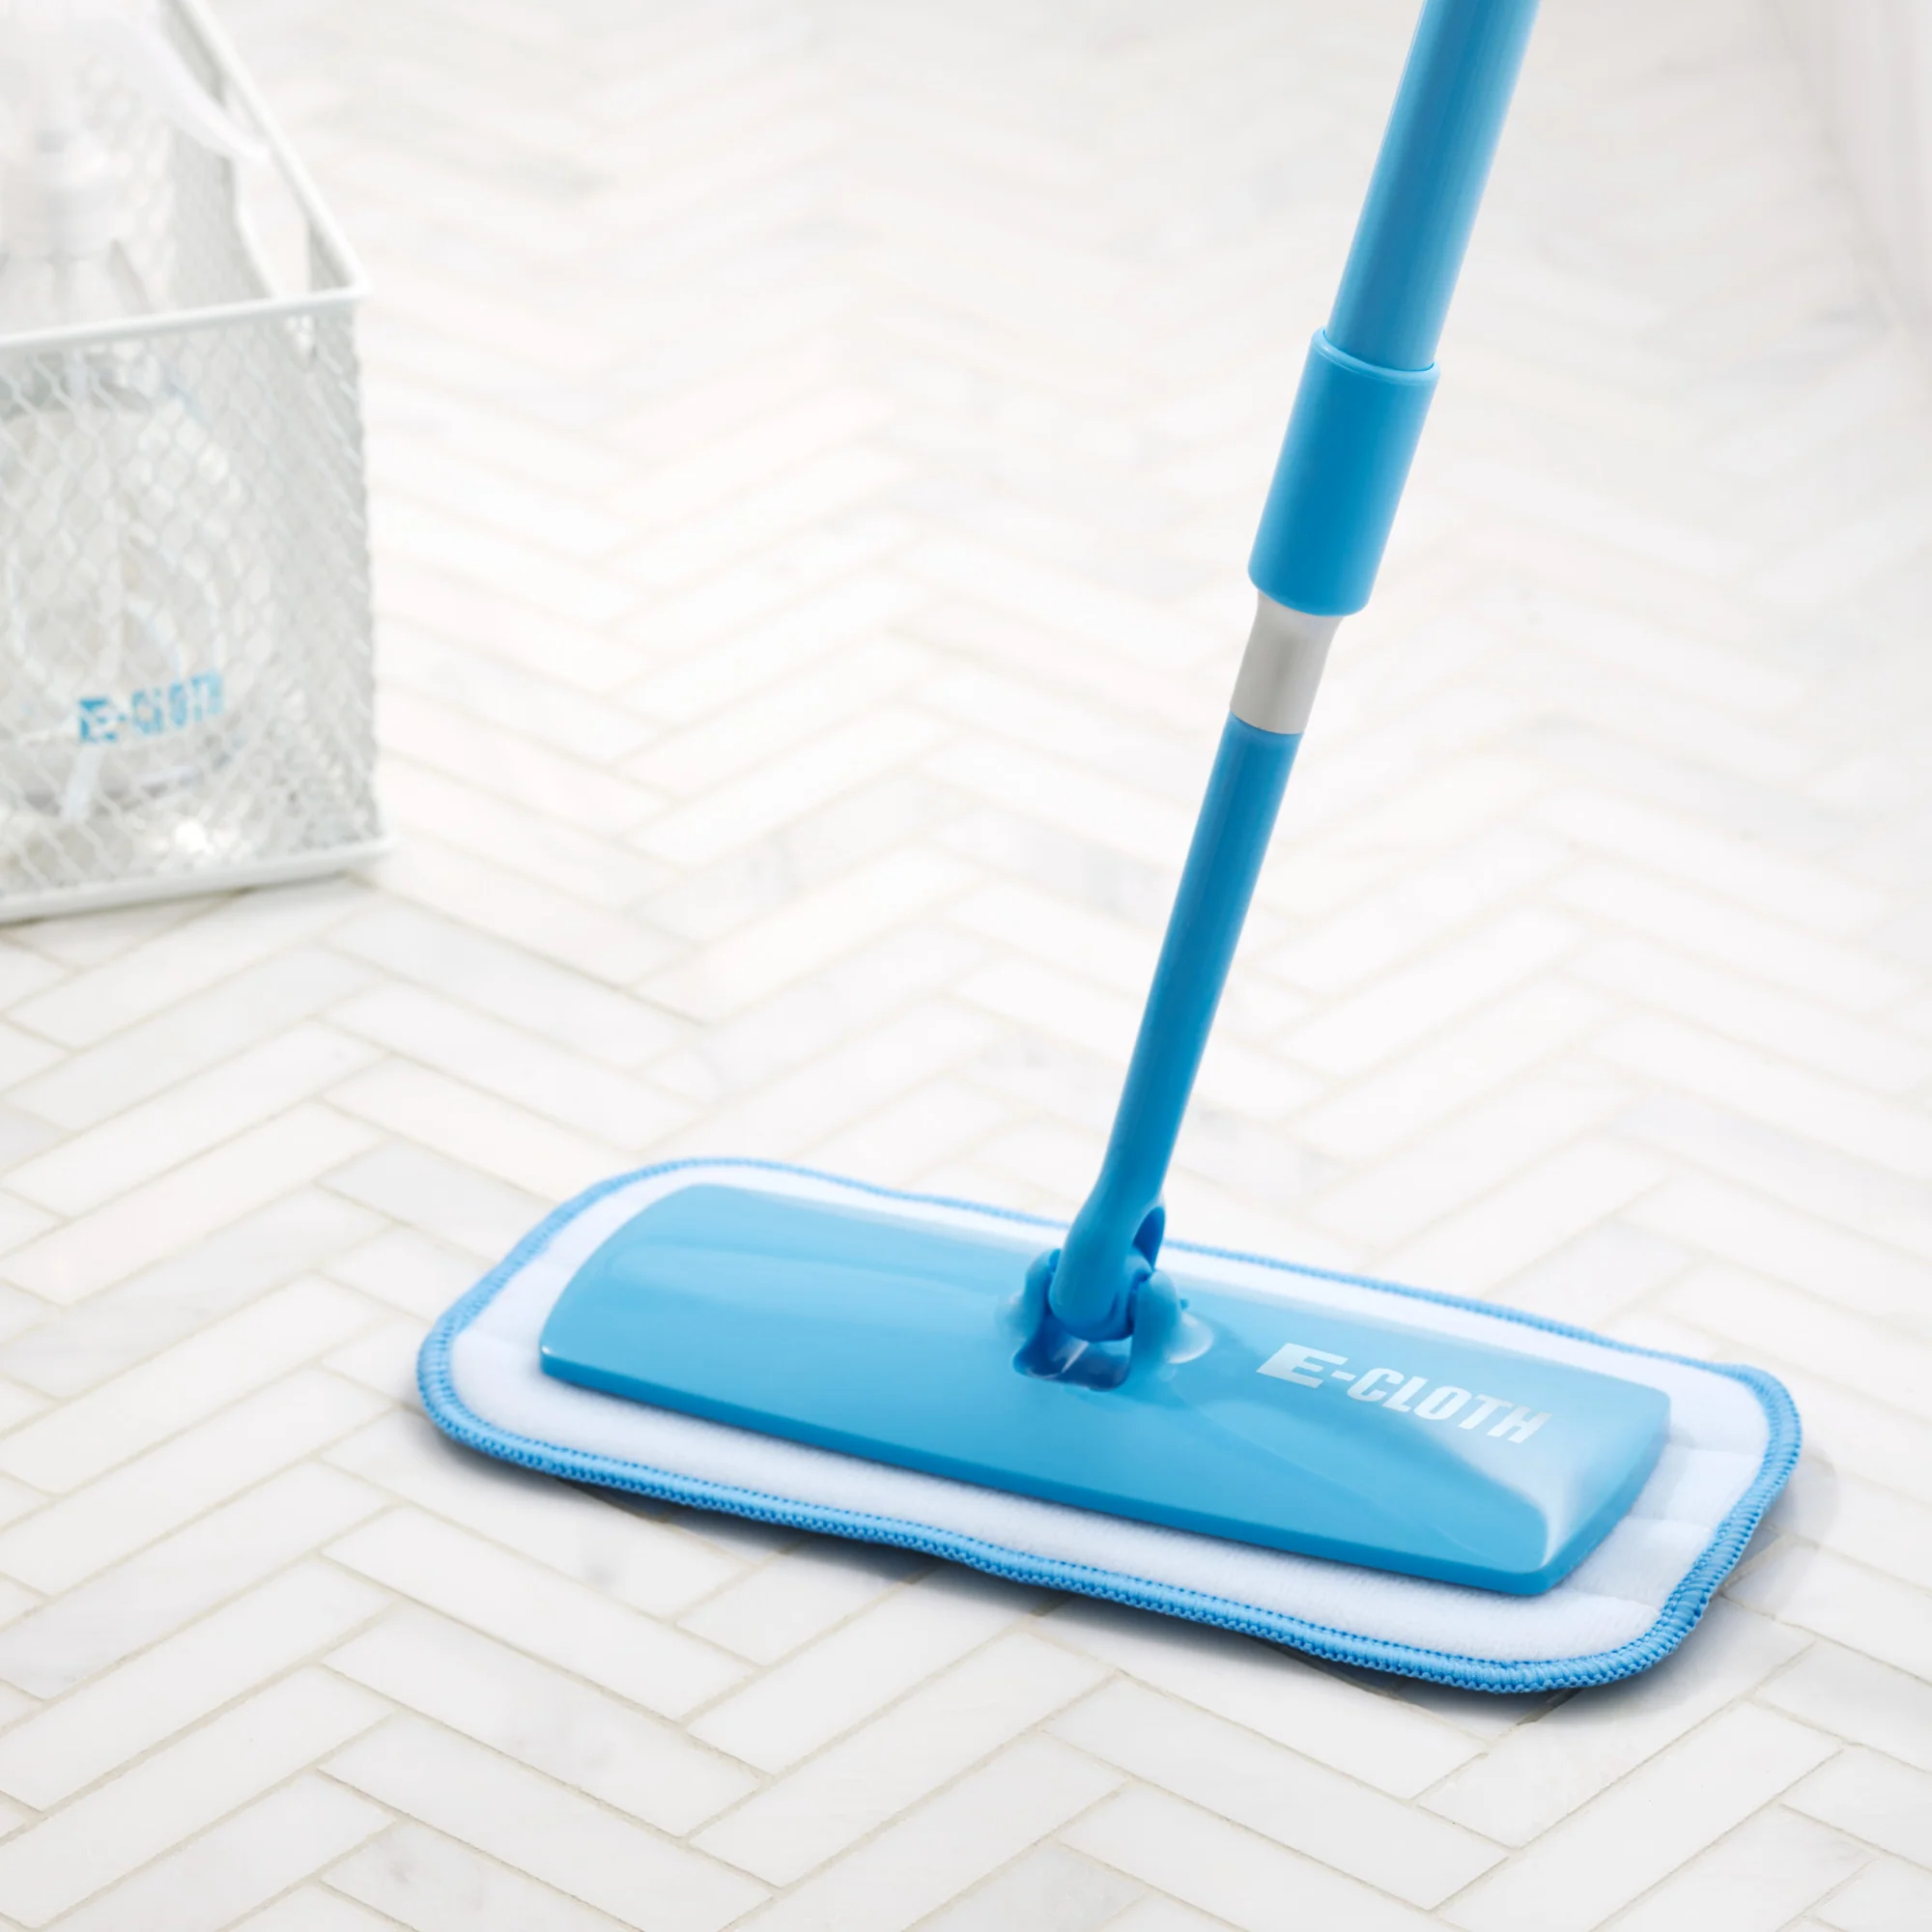 Mini Deep Clean Eco Mop Replacement Head